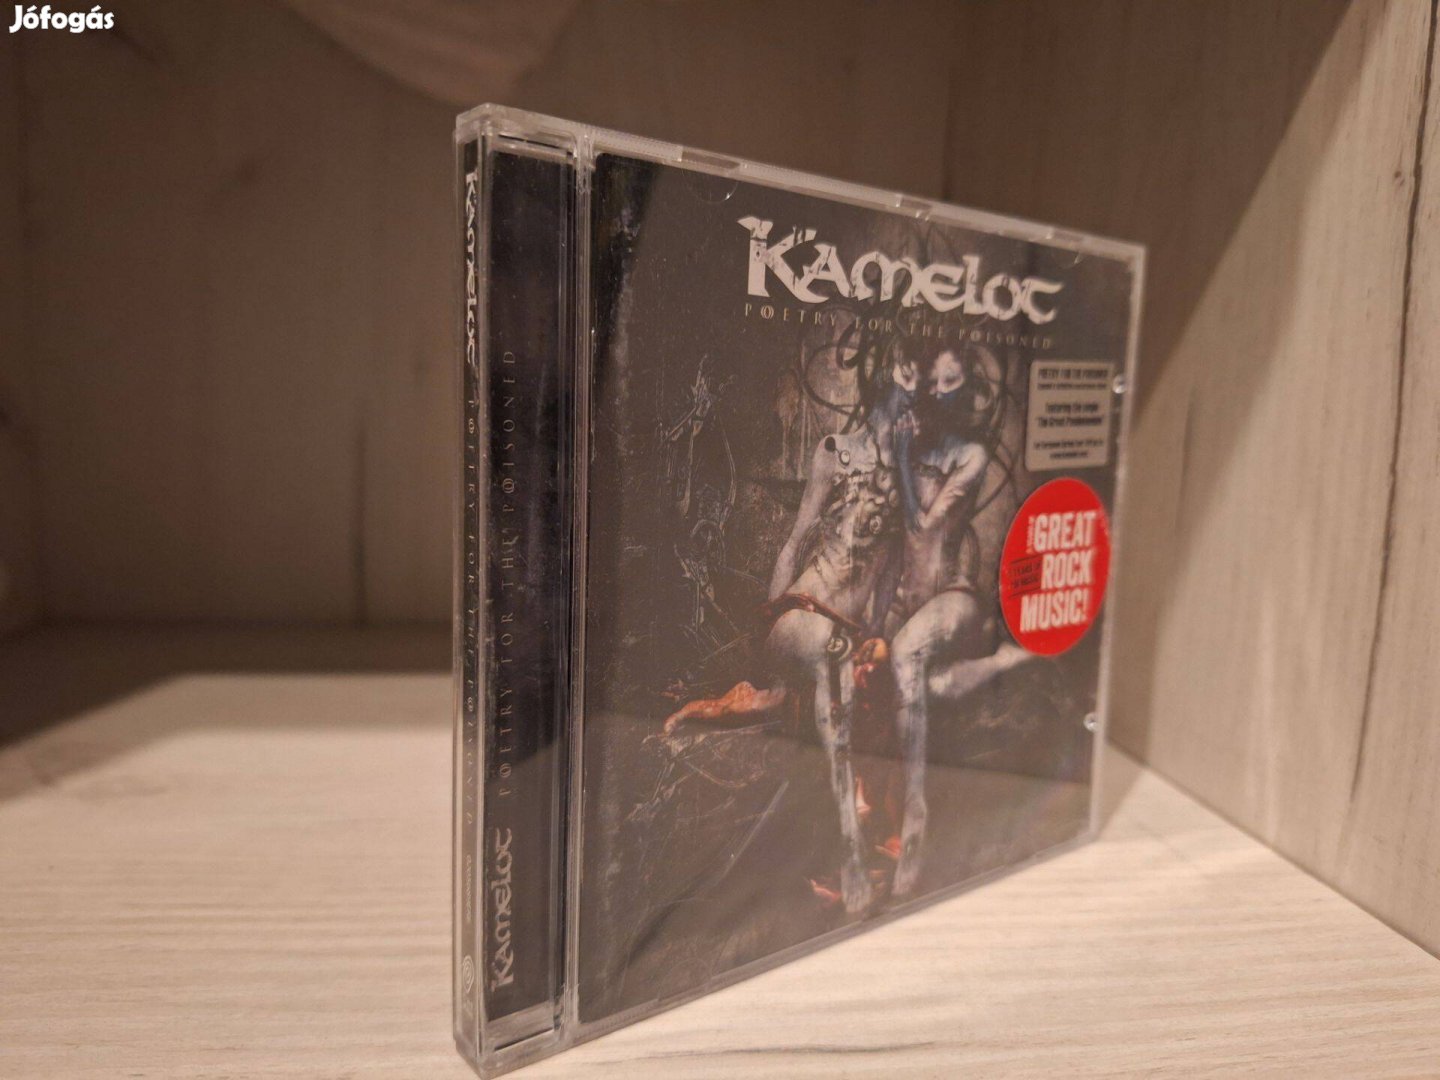 Kamelot - Poetry For The Poisoned CD